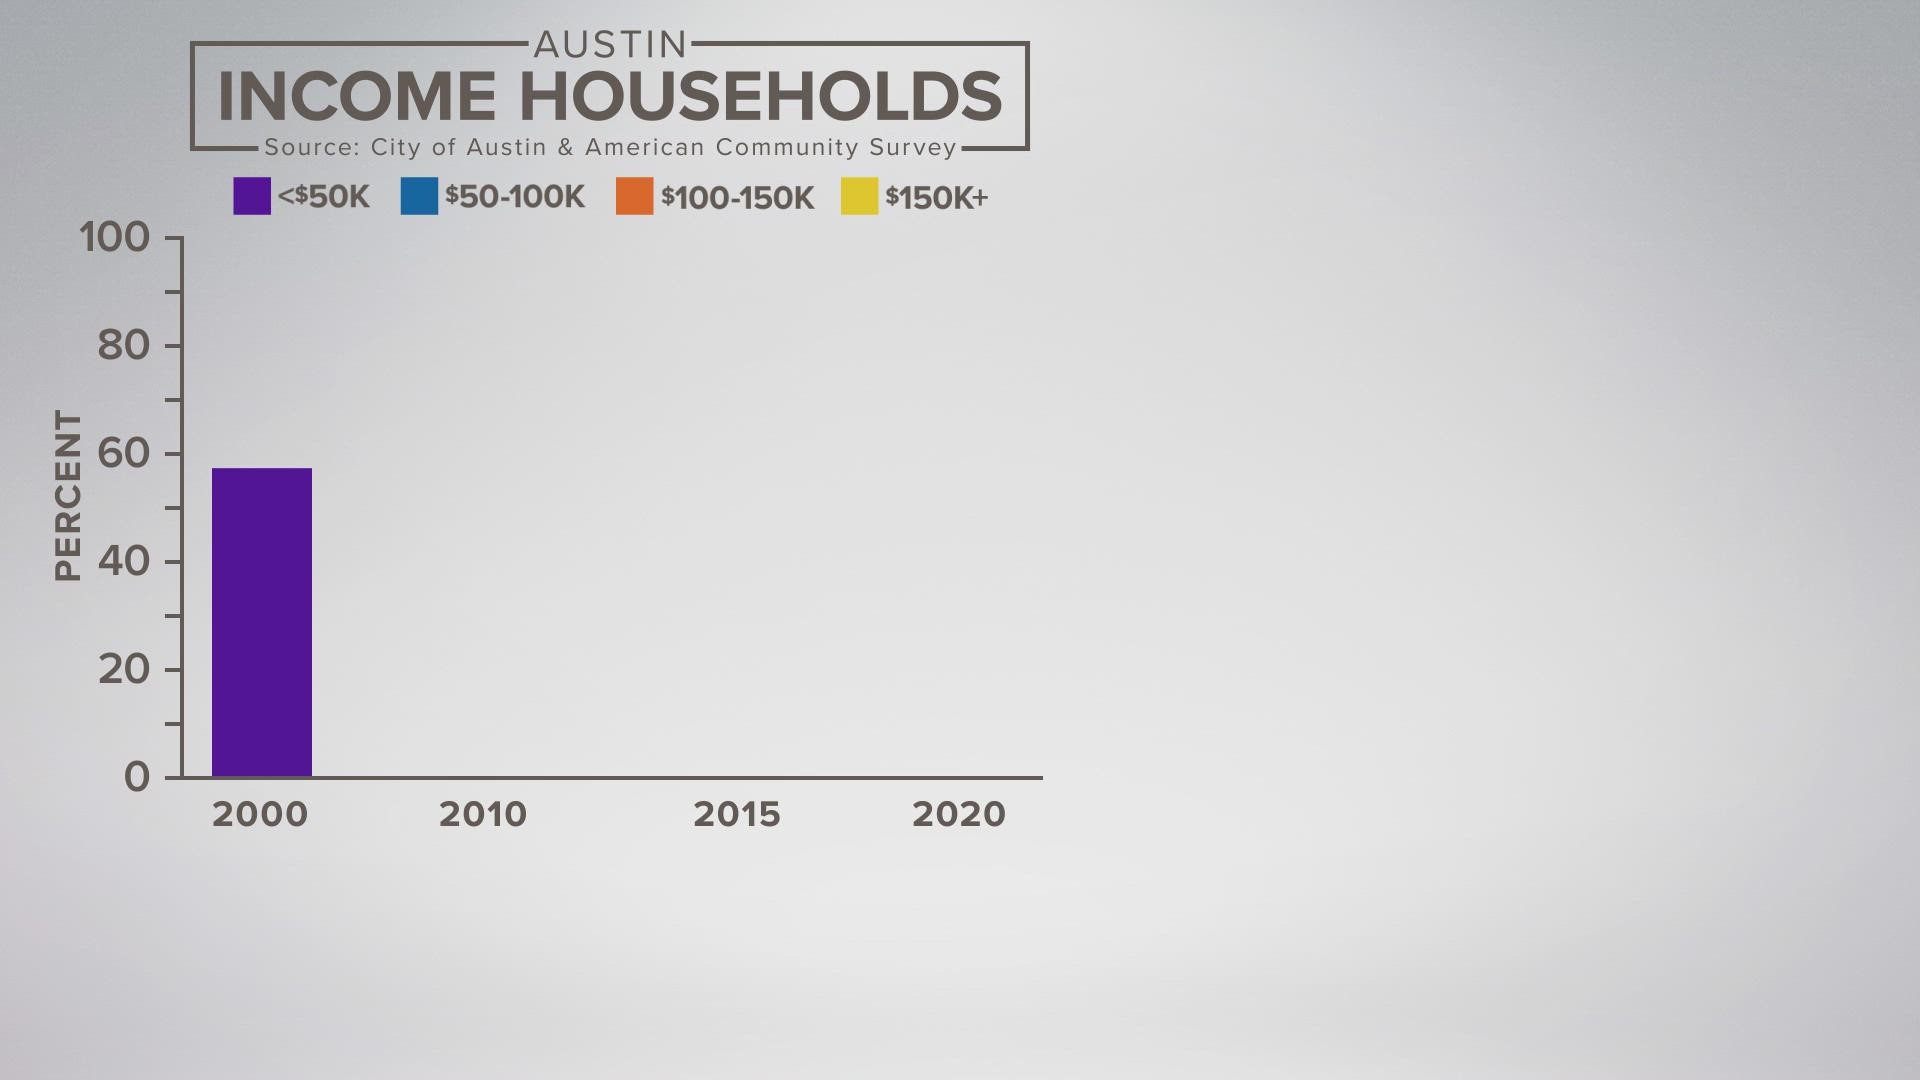 The graph looks at the income households in Austin make over the span of 20 years from 2000 to 2020.